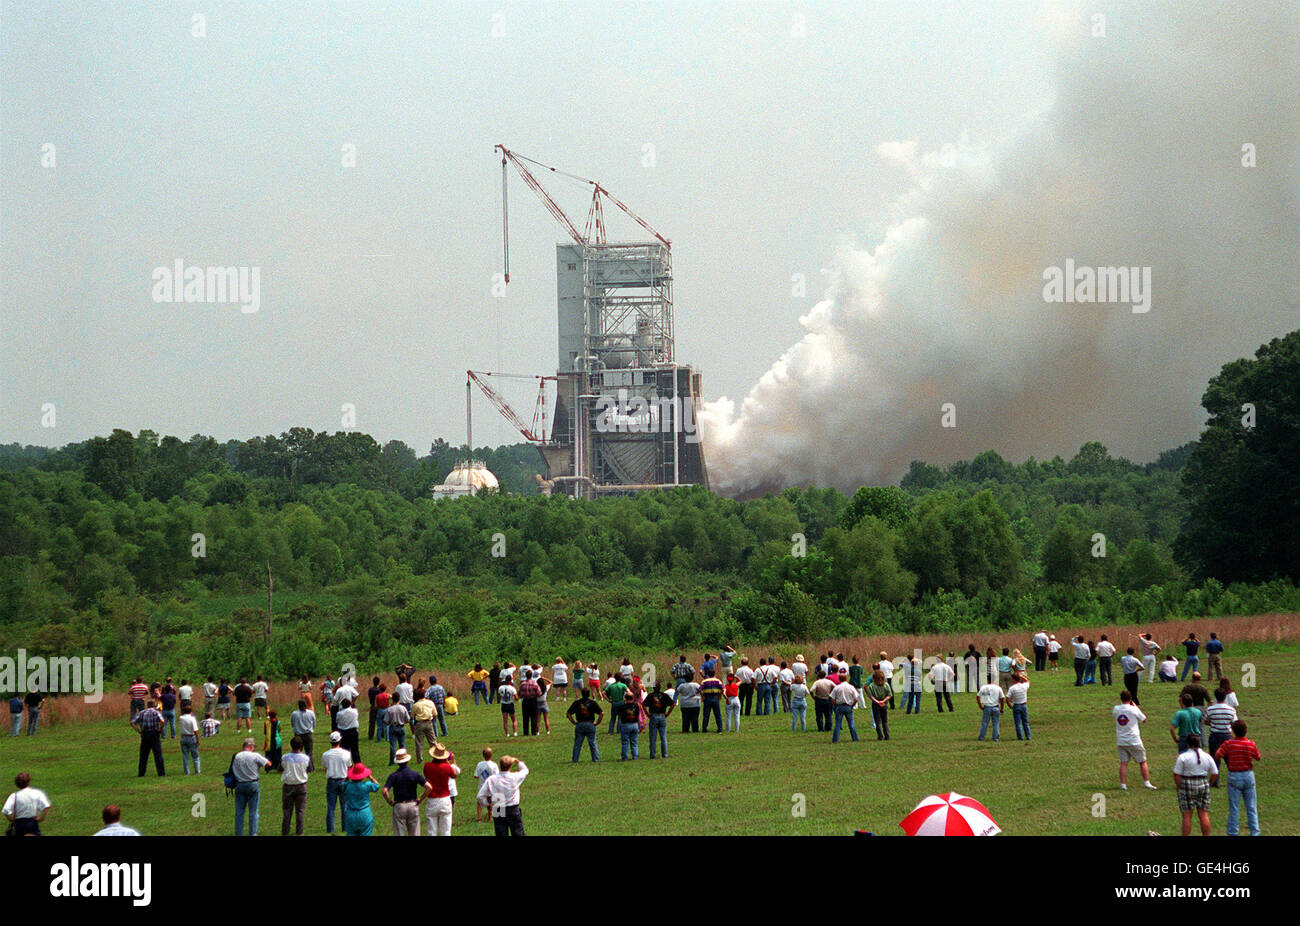 On the 25th Anniversary of the Apollo 11 (the first moon landing mission) launch, Marshall Space &amp; Flight Center celebrated with a test firing of the Space Shuttle Main Engine (SSME) at the Technology Test Bed (TTB). This drew a large crowd who stood in the fields around the test site and watched as plumes of white smoke verified ignition. Stock Photo